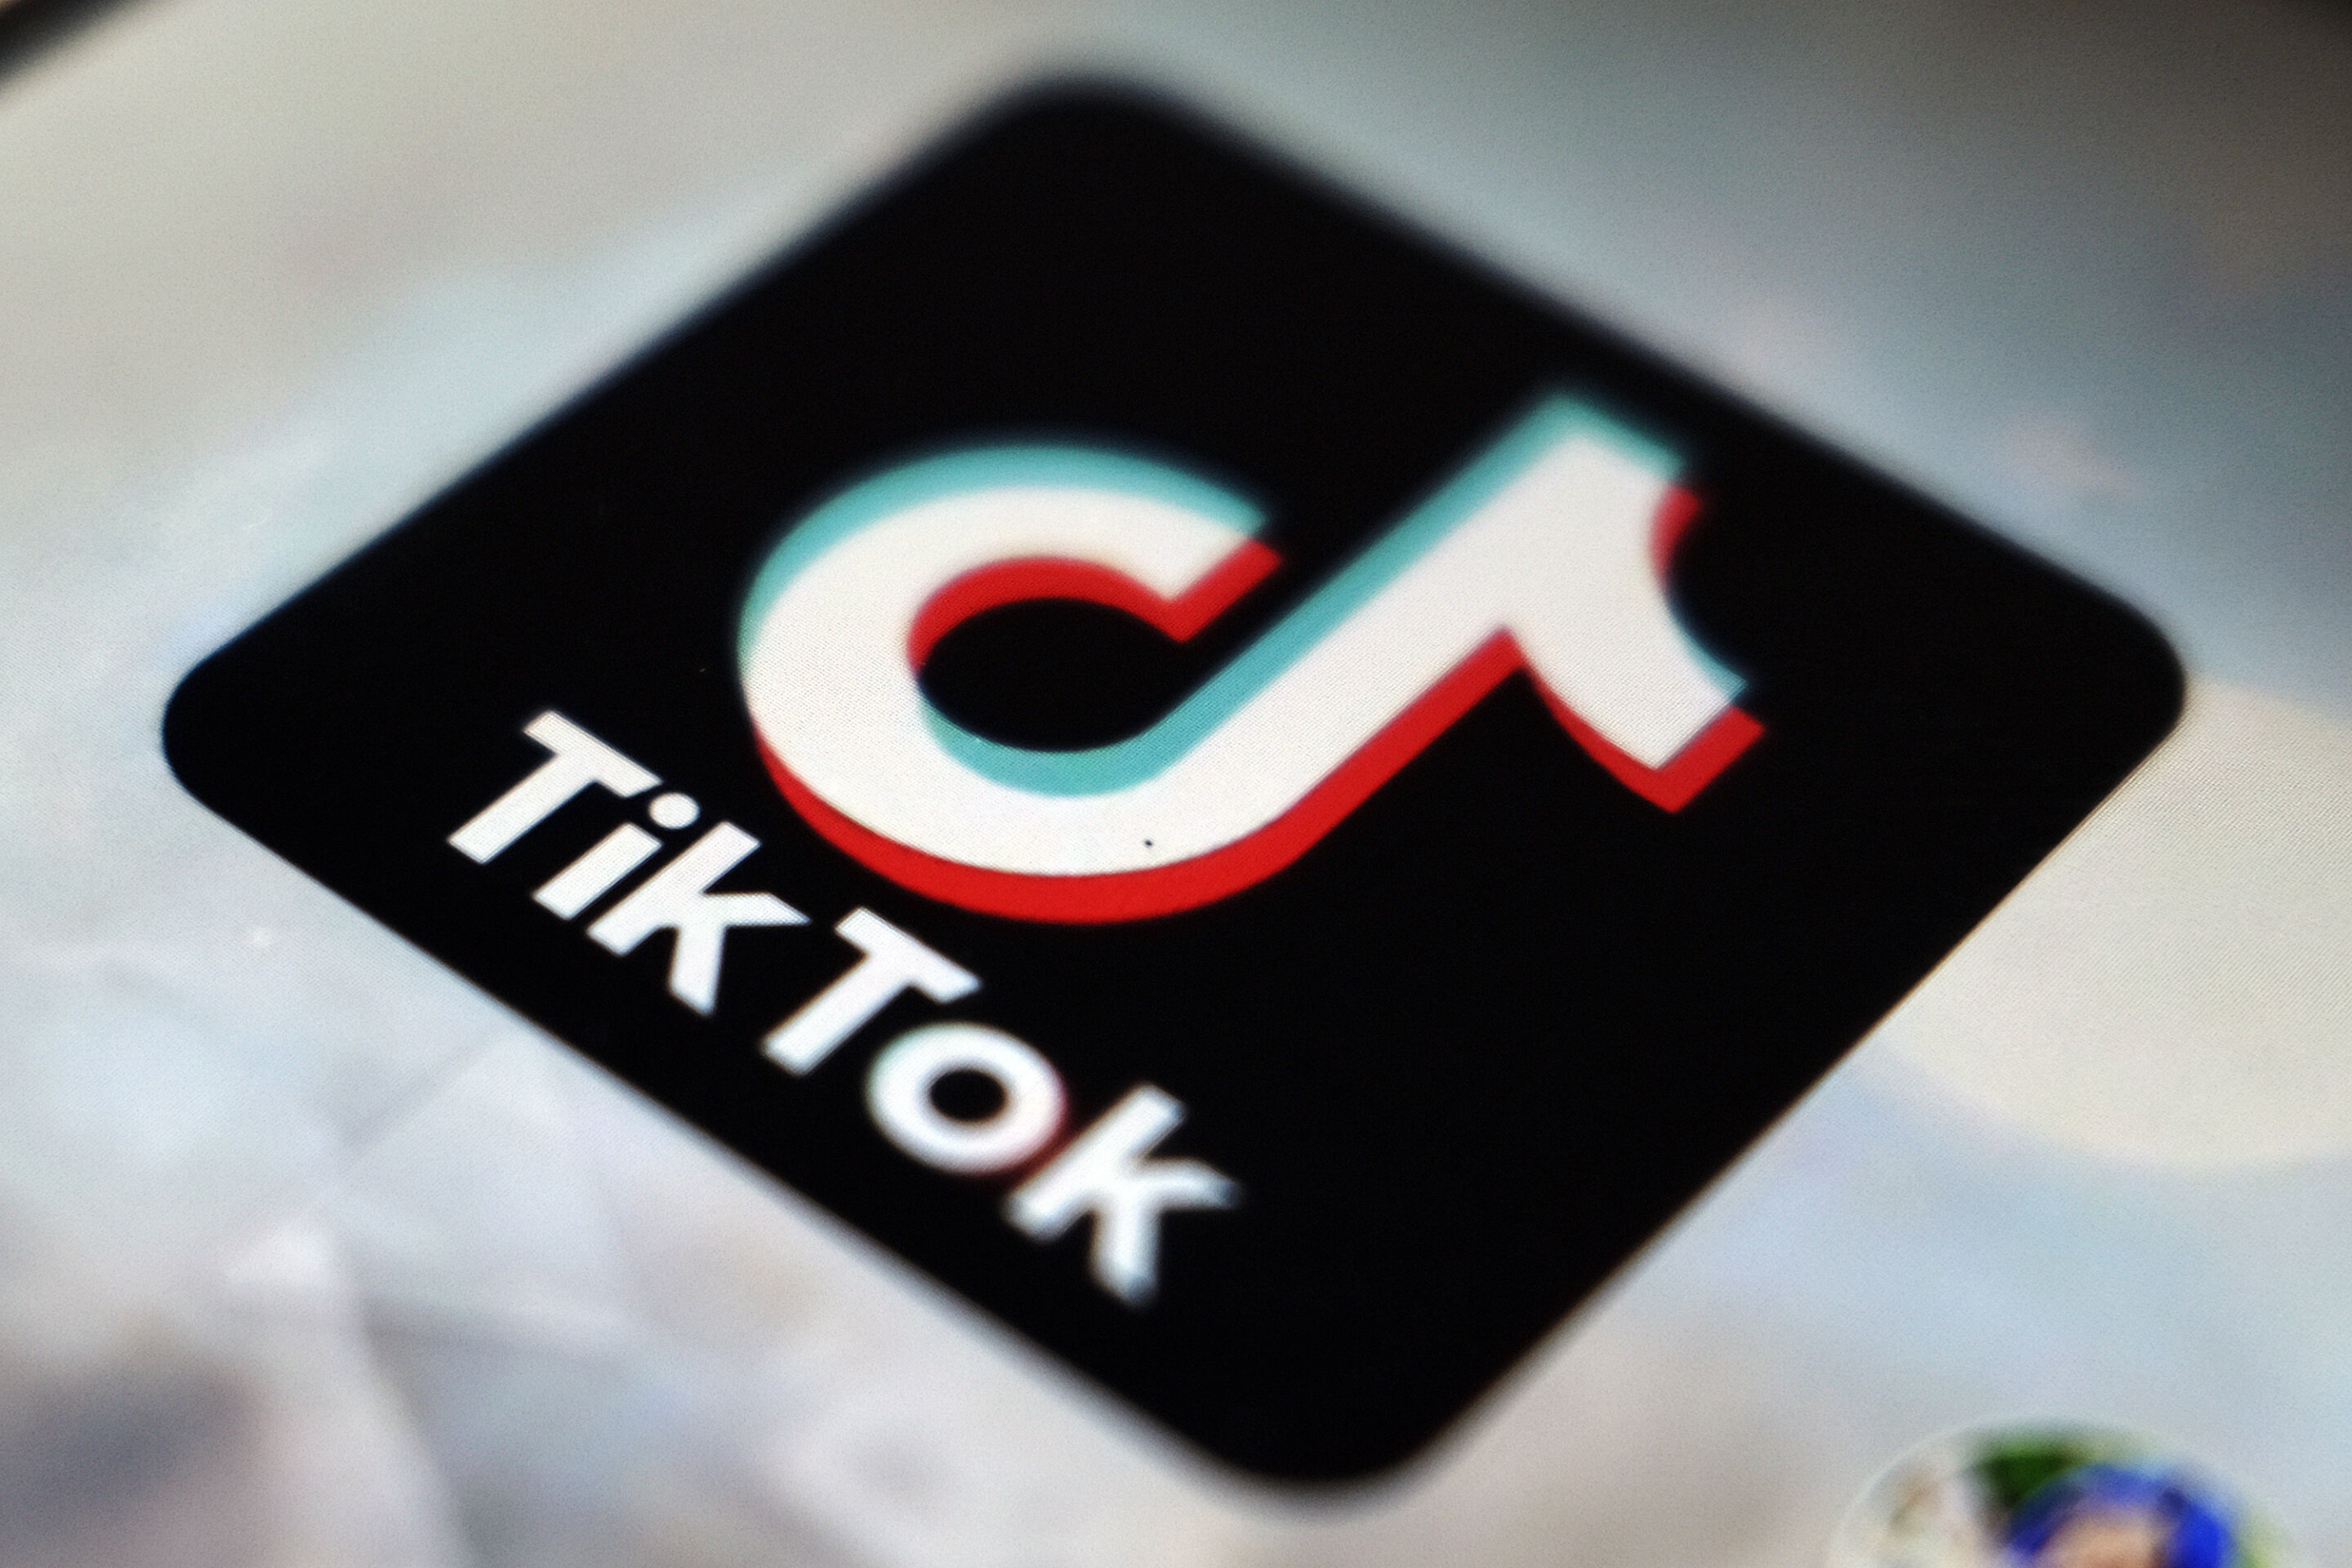 #TikTok finds ‘partner’ in Europe to offer security reassurances